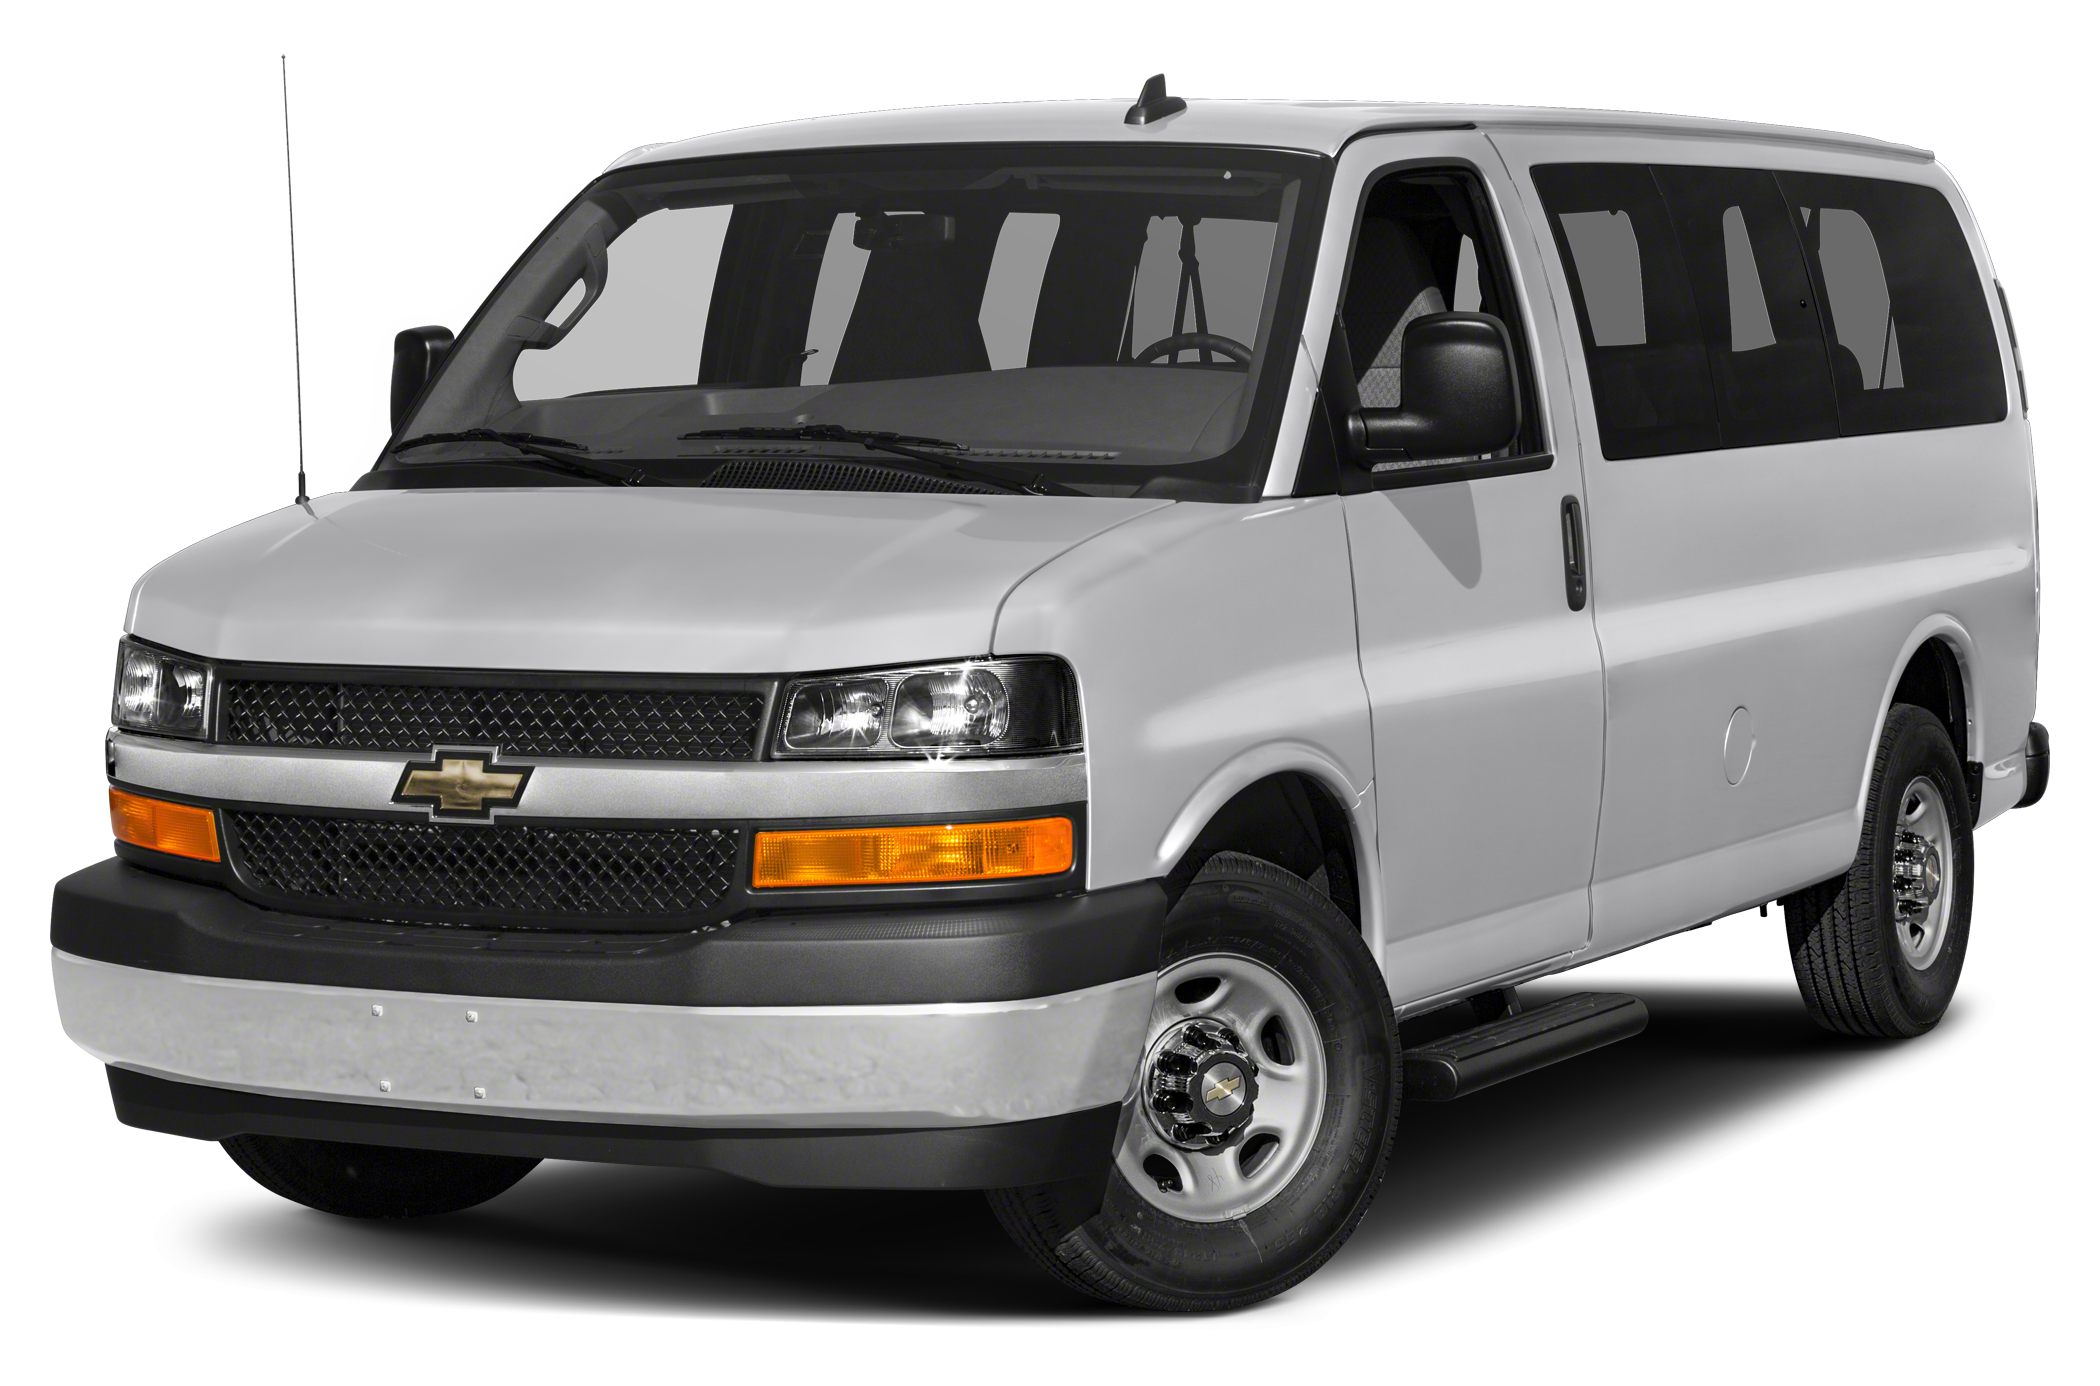 2015 Chevrolet Express 2500 Specs and 